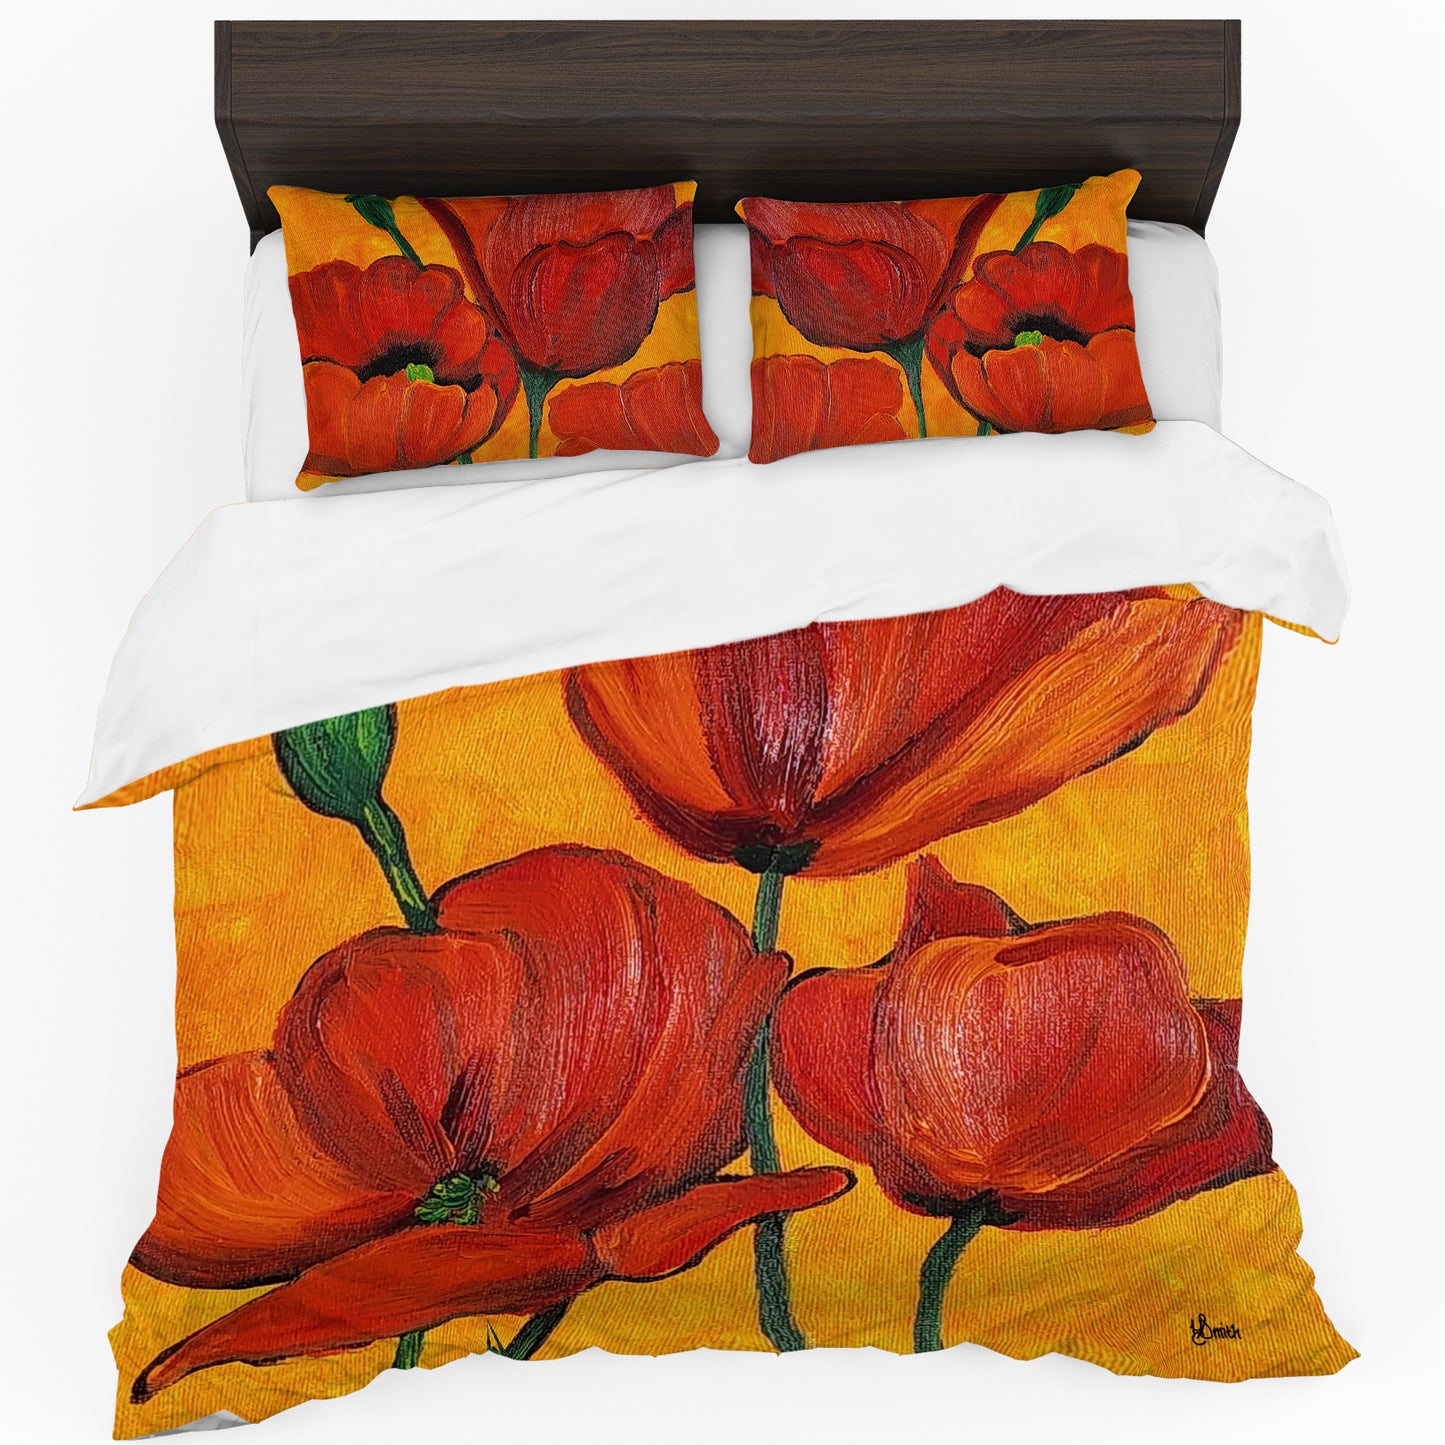 Blossoming Poppies Duvet Cover Set by Yolande Smith